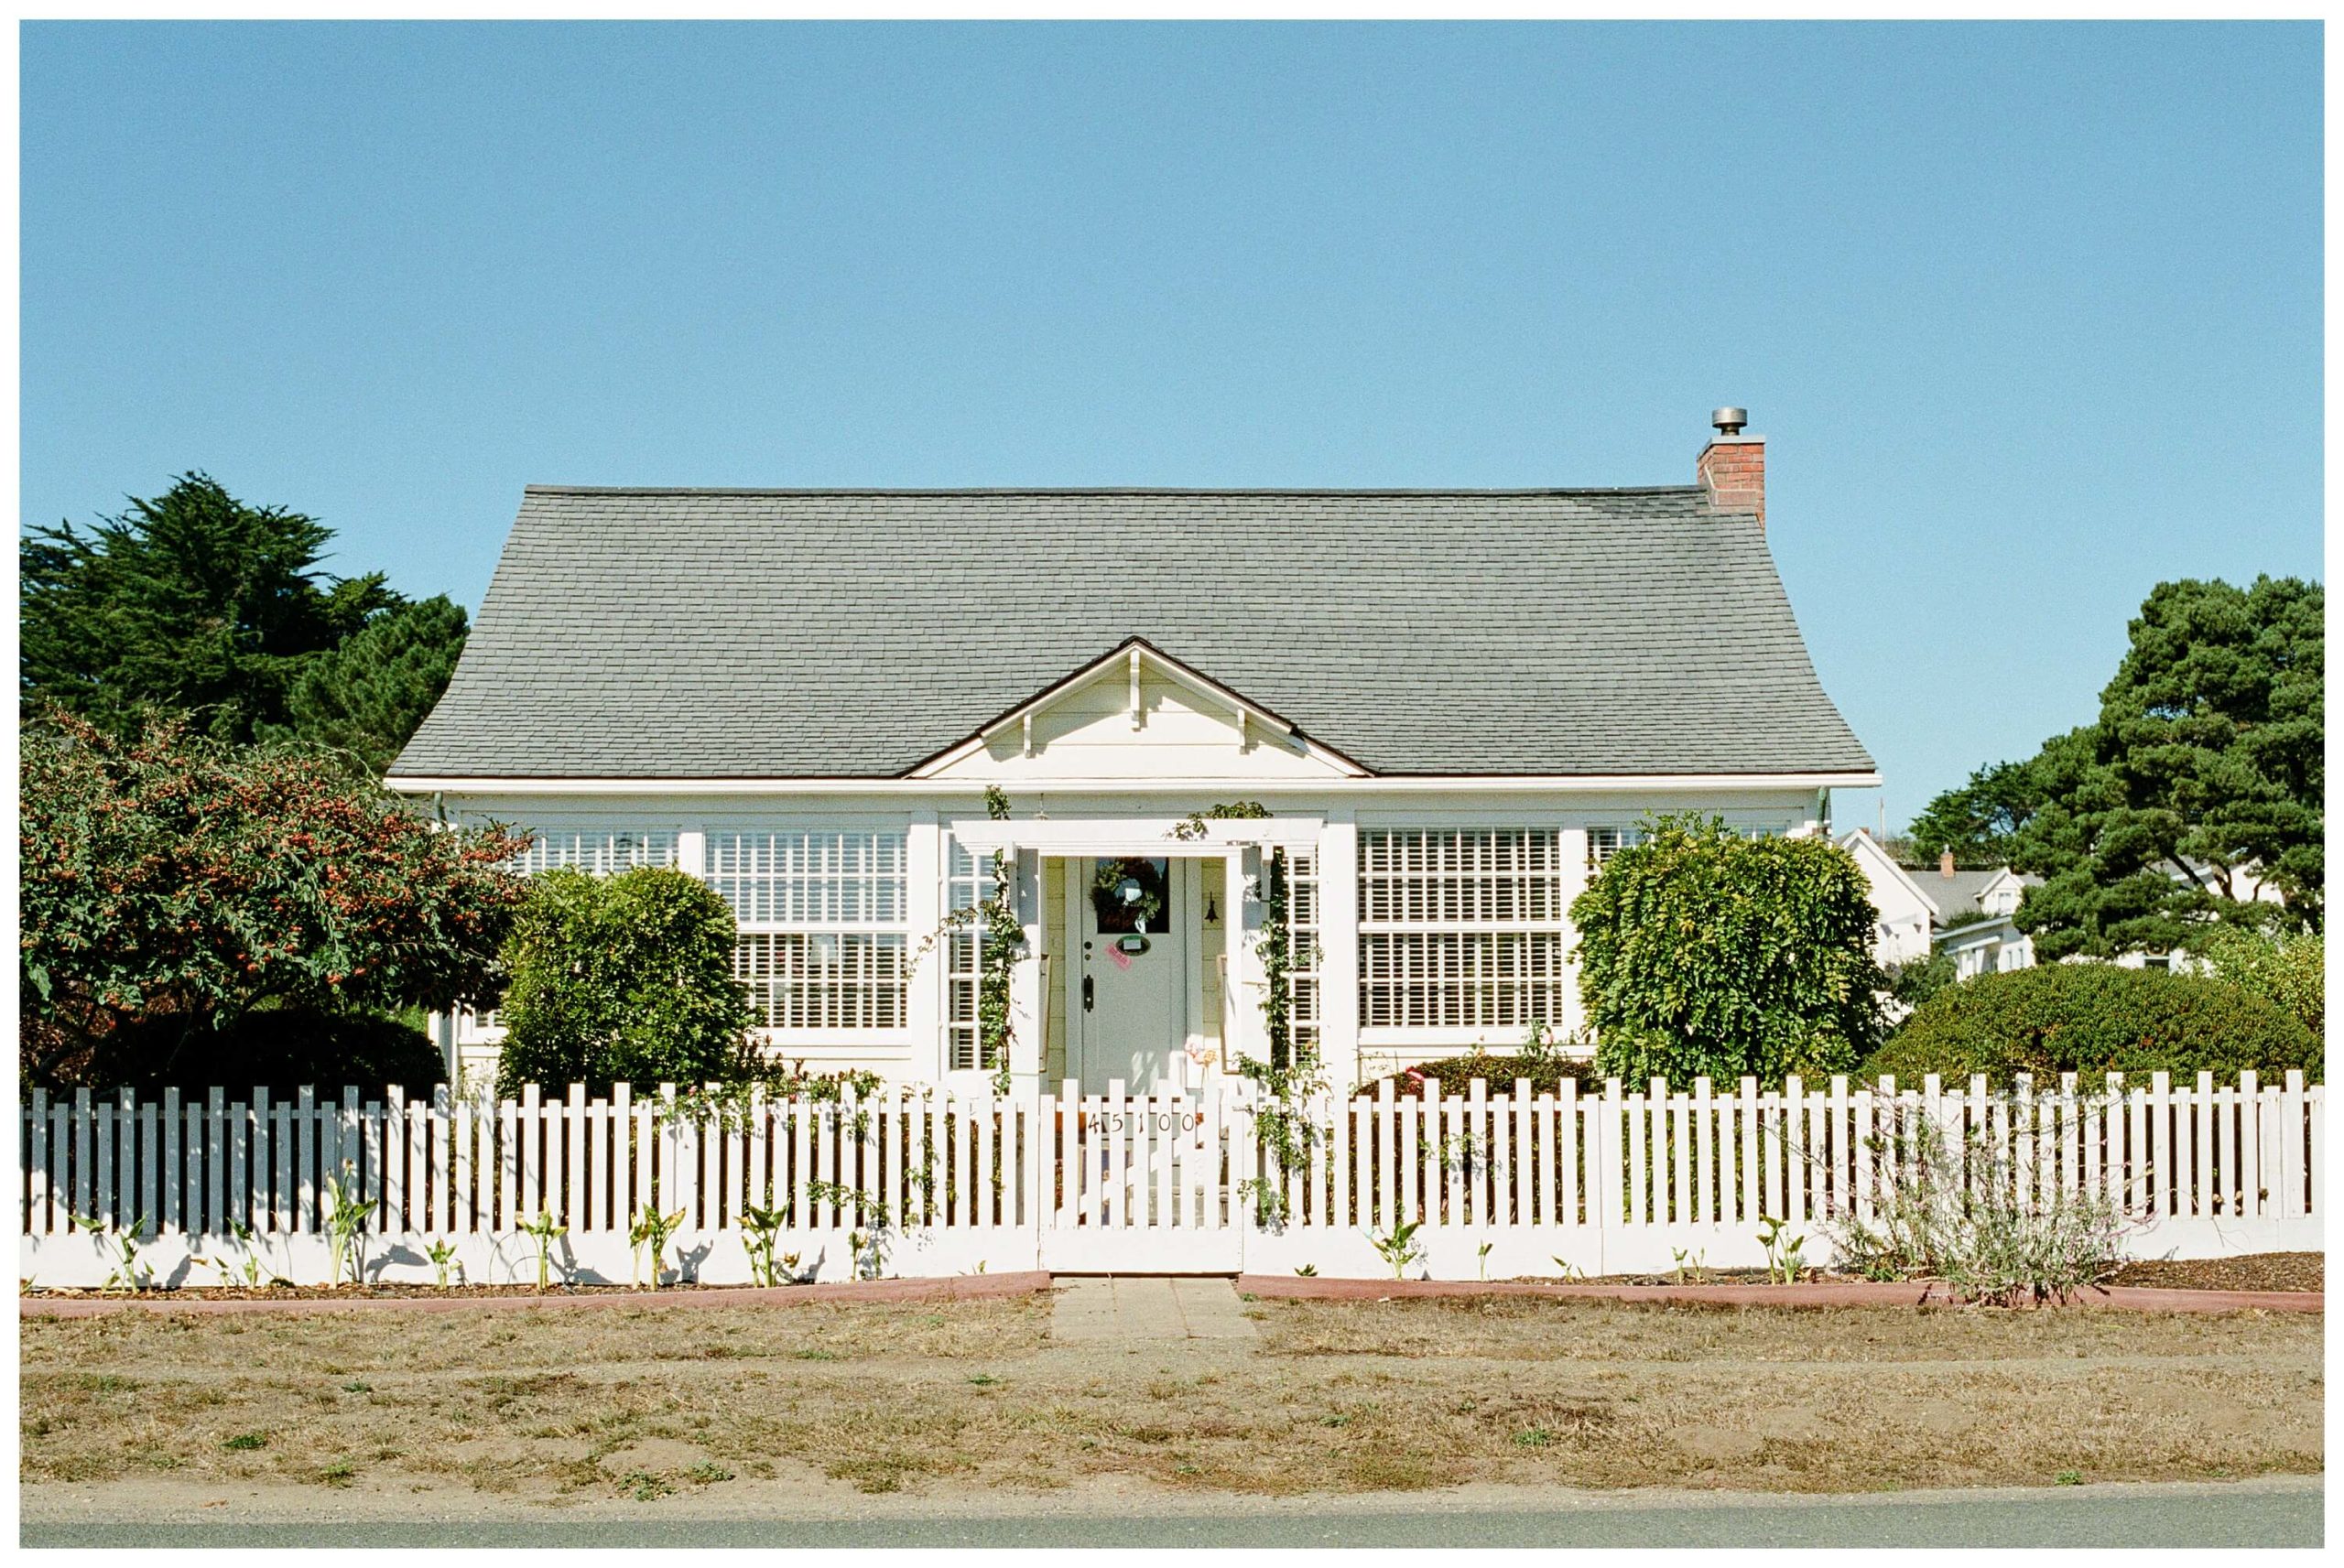 A white, single-story saltbox house in the northern California coastal town of Mendocino.